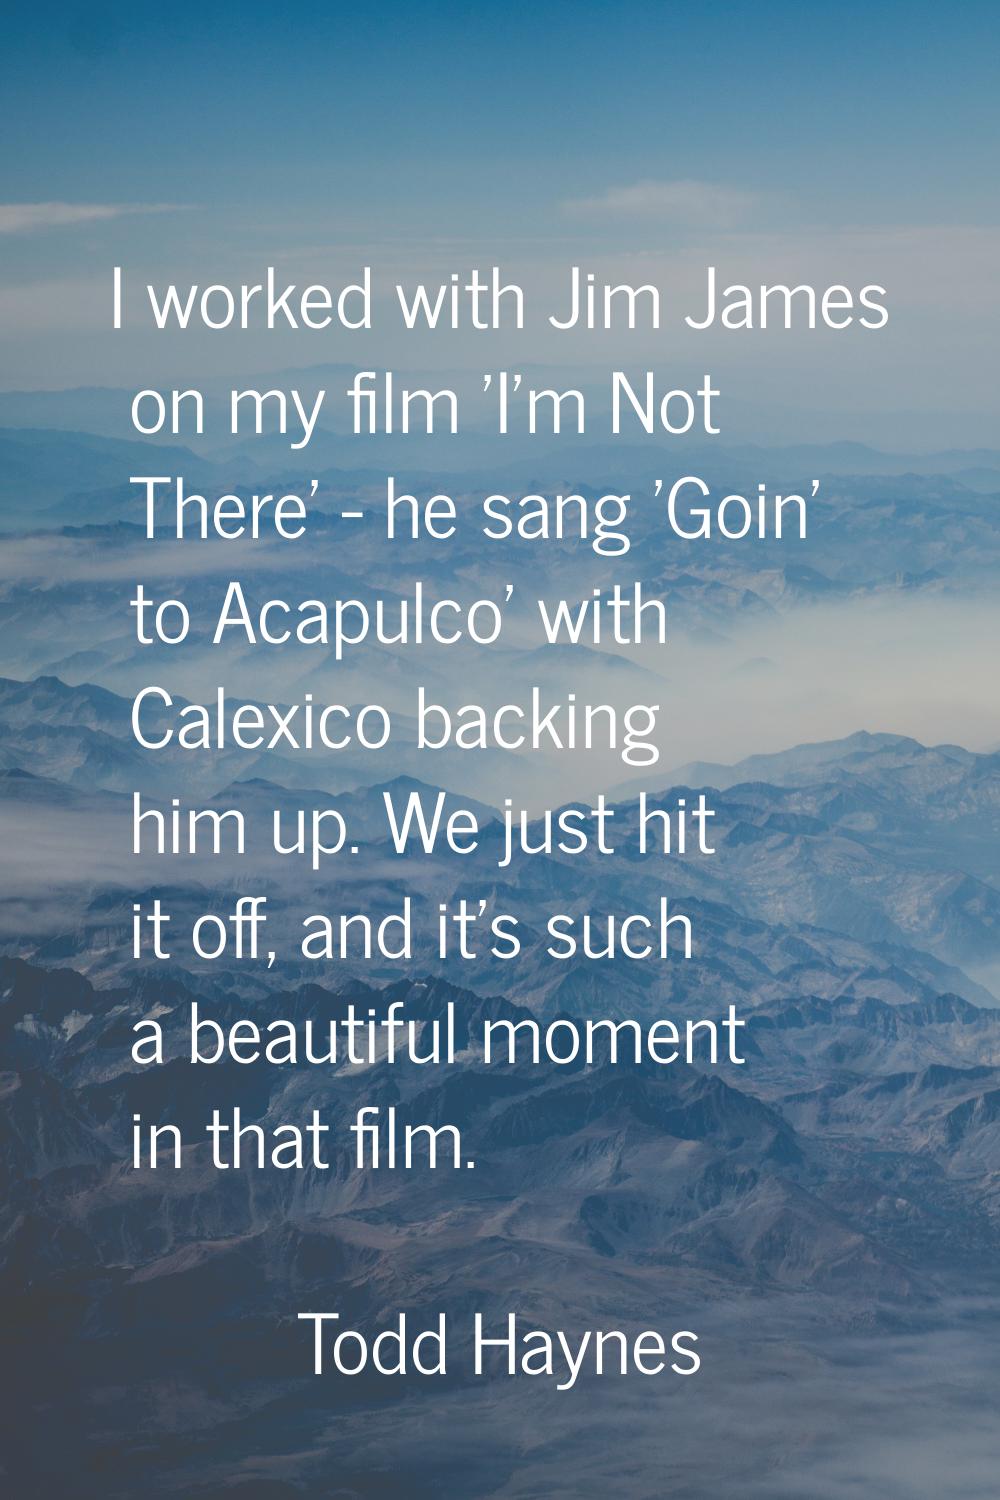 I worked with Jim James on my film 'I'm Not There' - he sang 'Goin' to Acapulco' with Calexico back